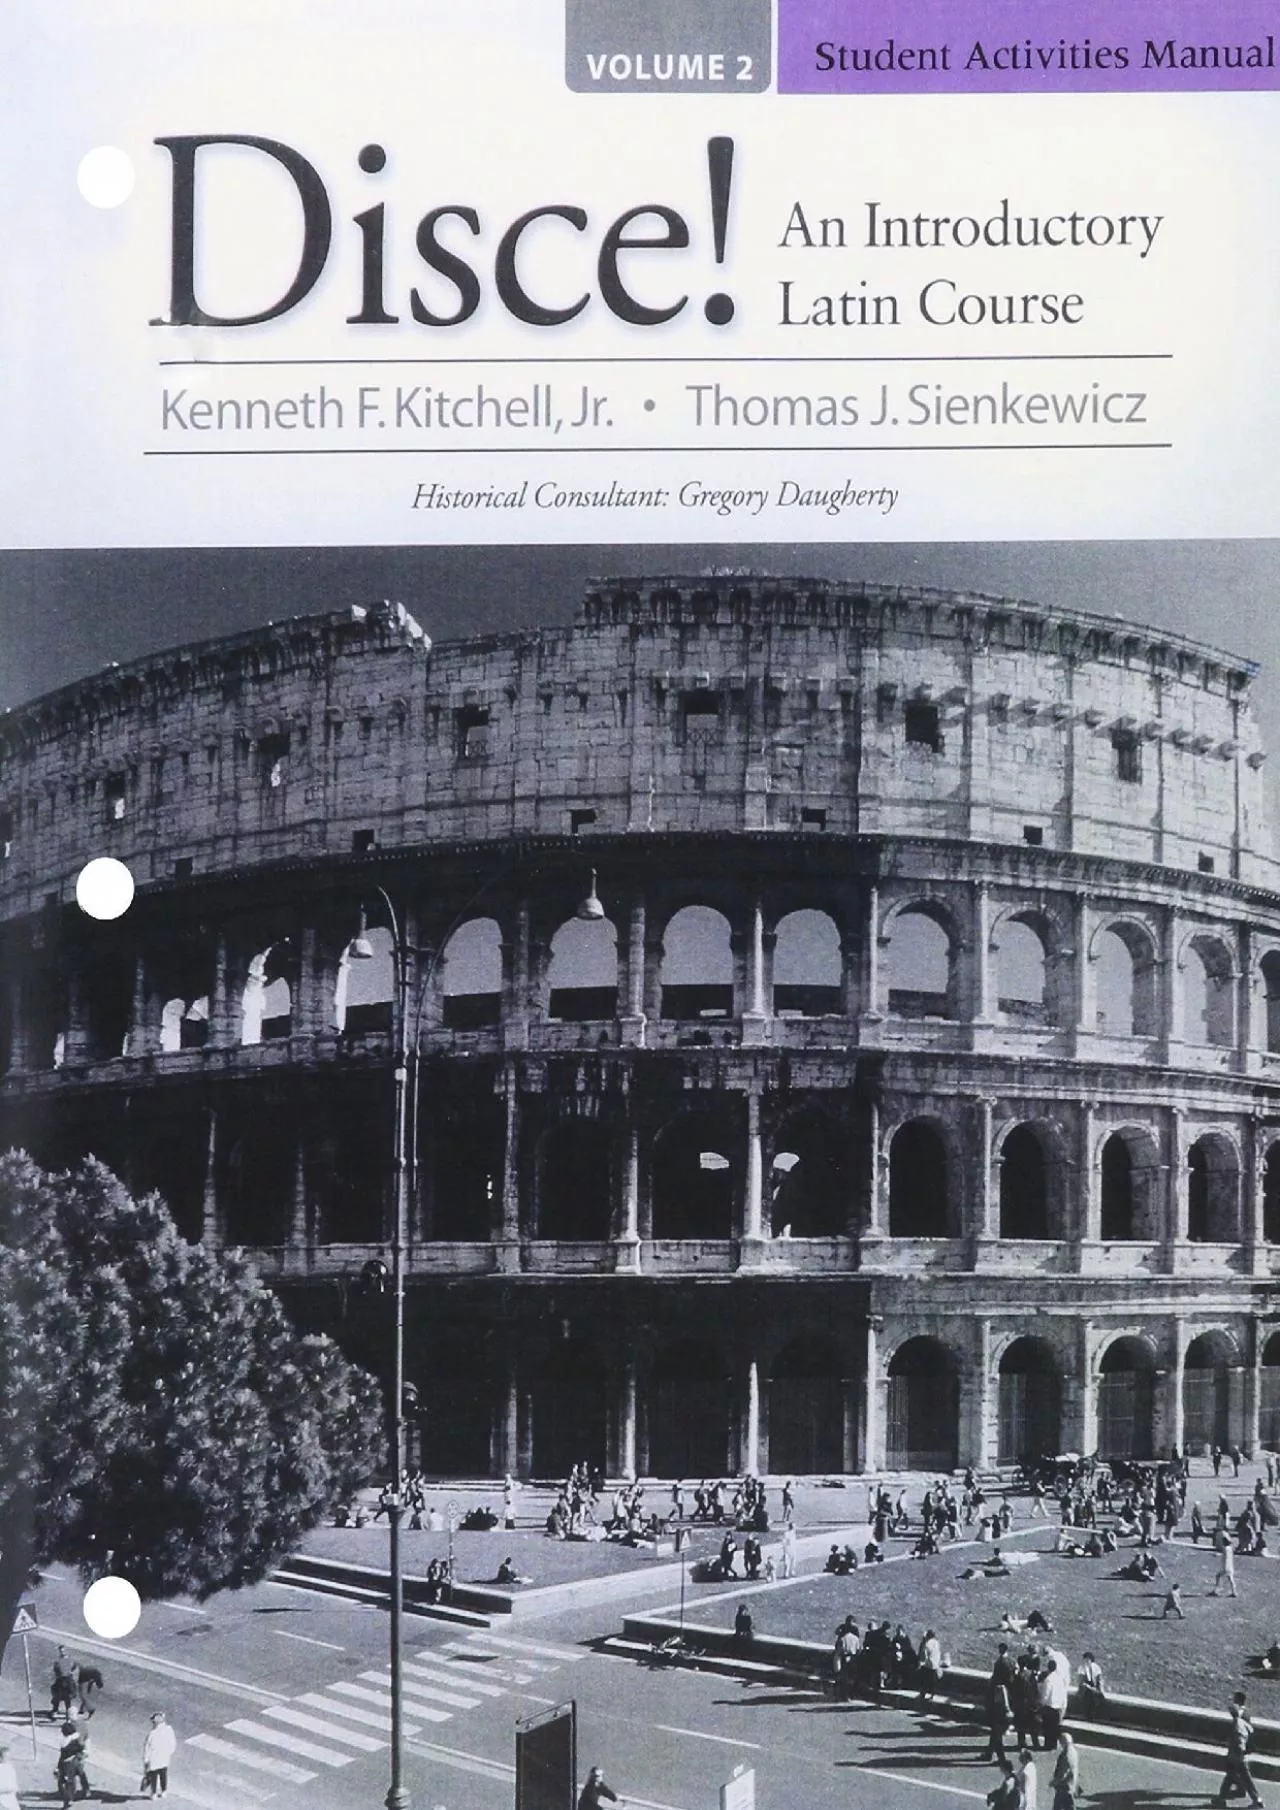 [READING BOOK]-Student Activities Manual for Disce! An Introductory Latin Course, Volume